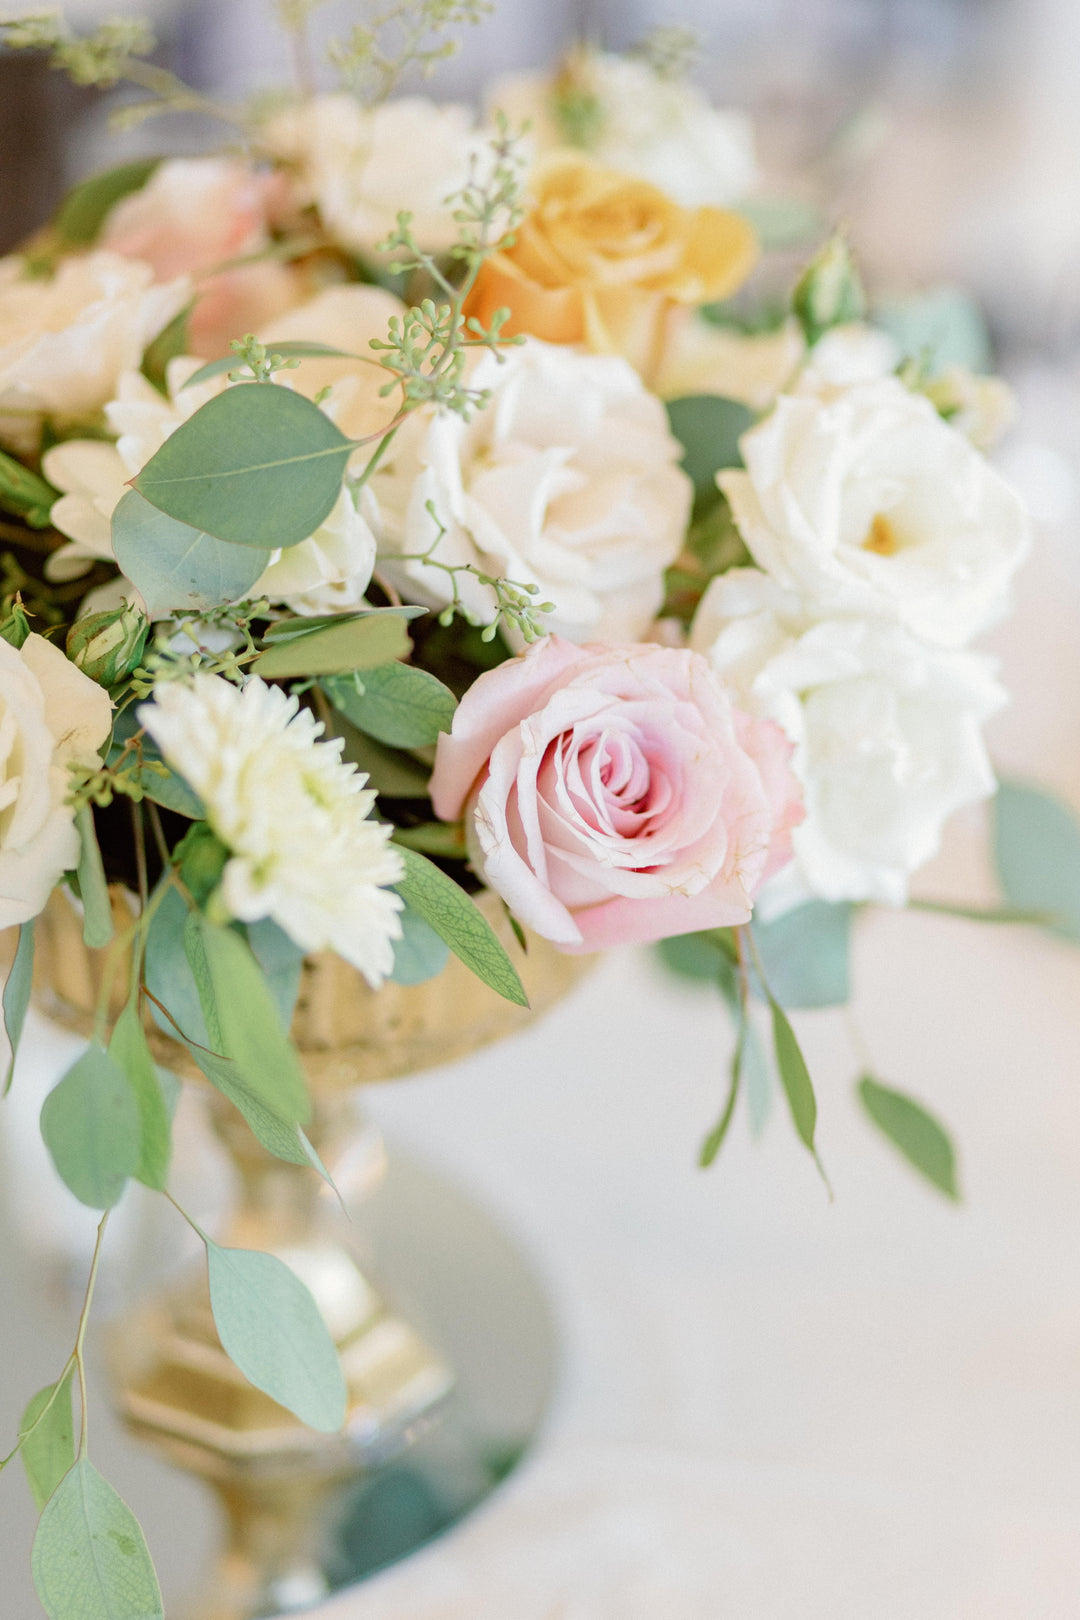 Close up on a floral centerpiece in a gold vase filled with pastel whites, pinks, and oranges. Accented with greenery.